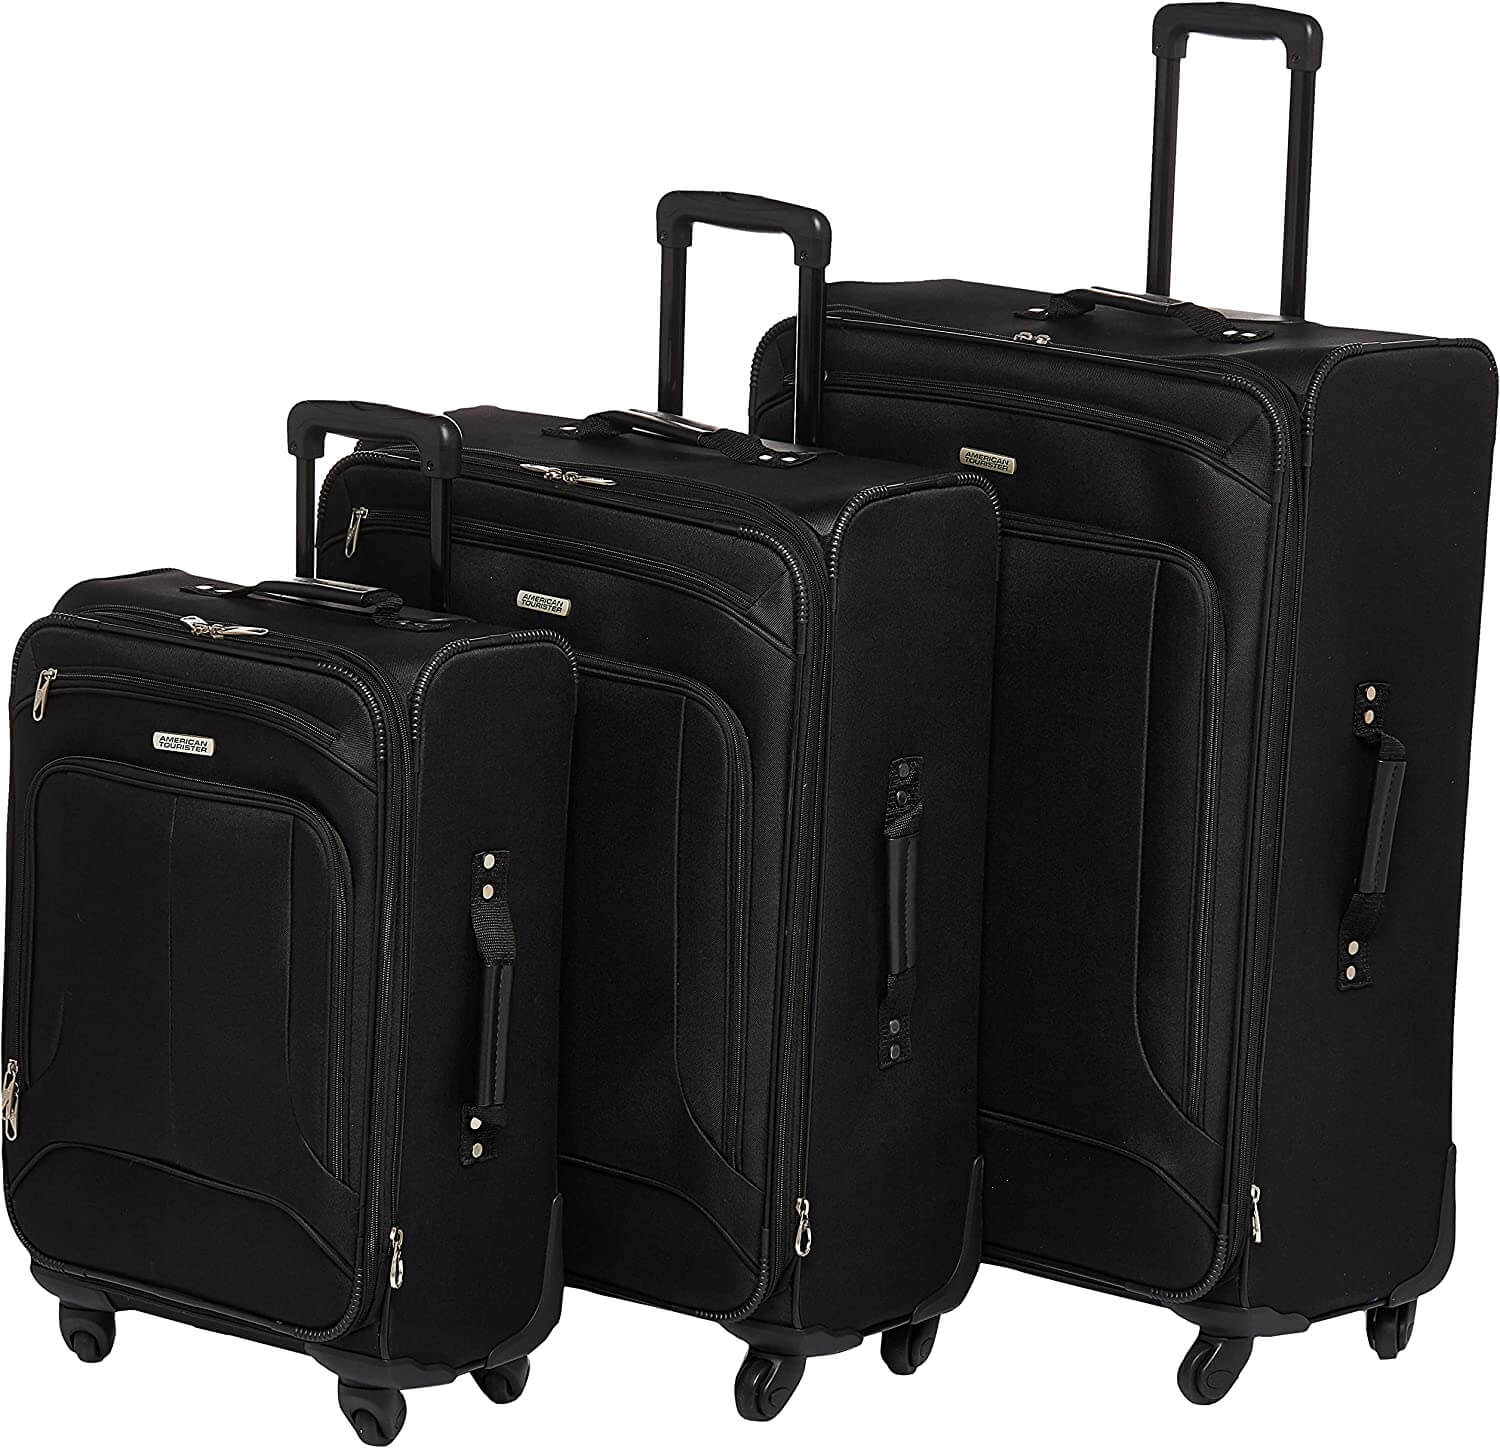 three black suitcases with wheels and handles